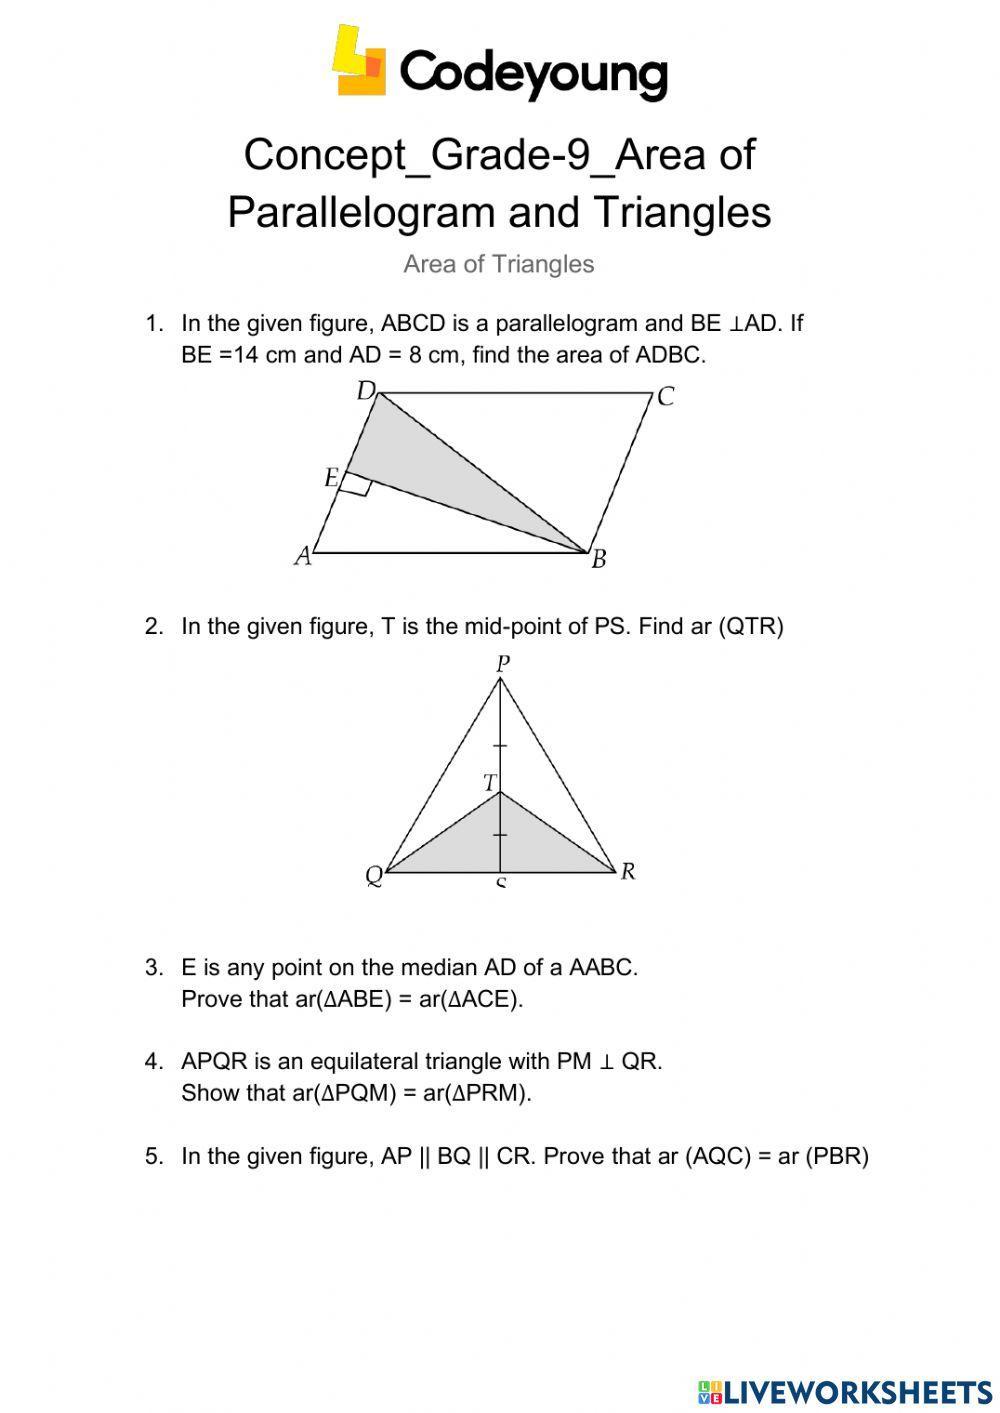 Area of parallelogram and triangles